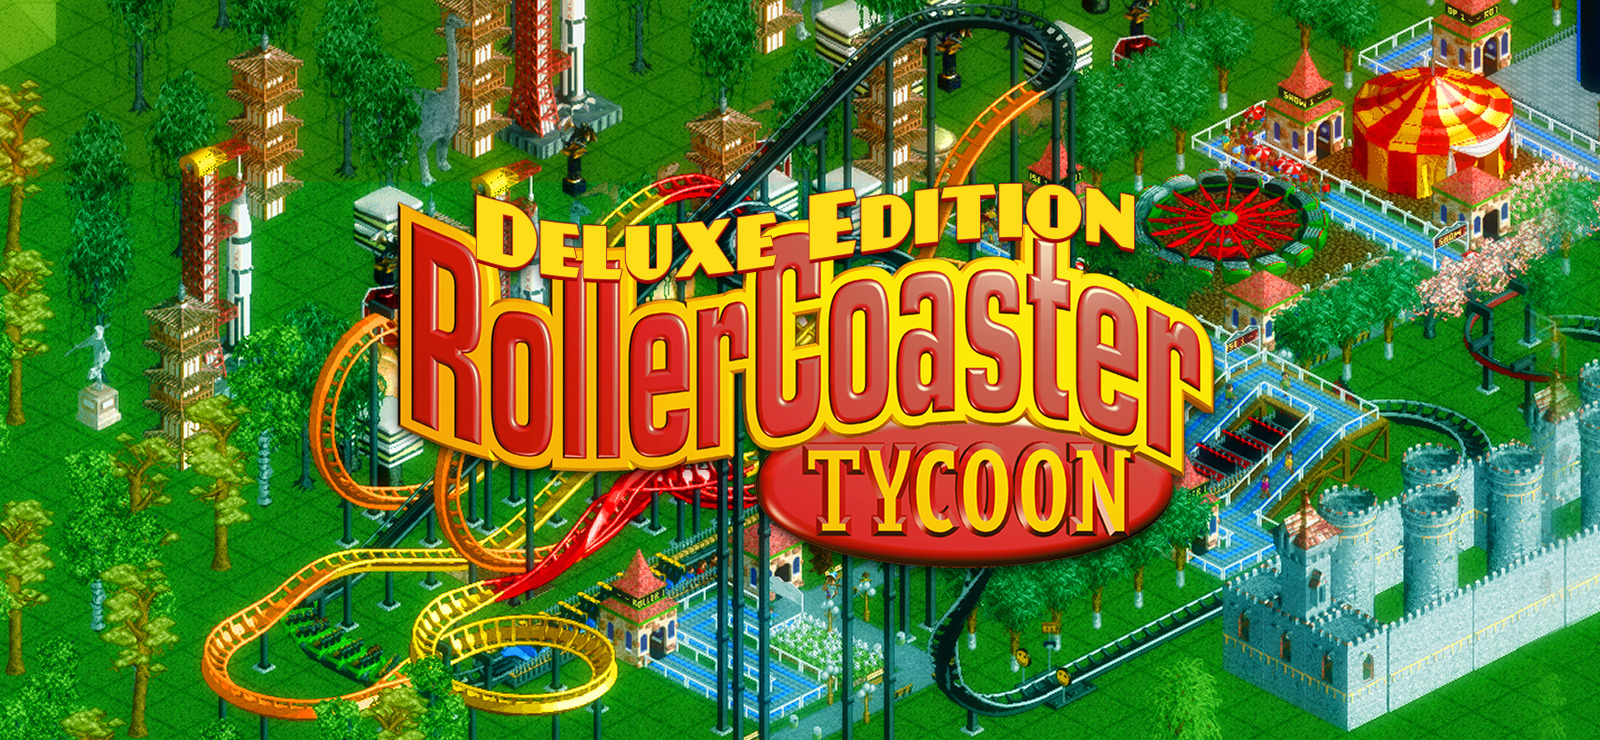 RollerCoaster Tycoon Touch – Apps no Google Play